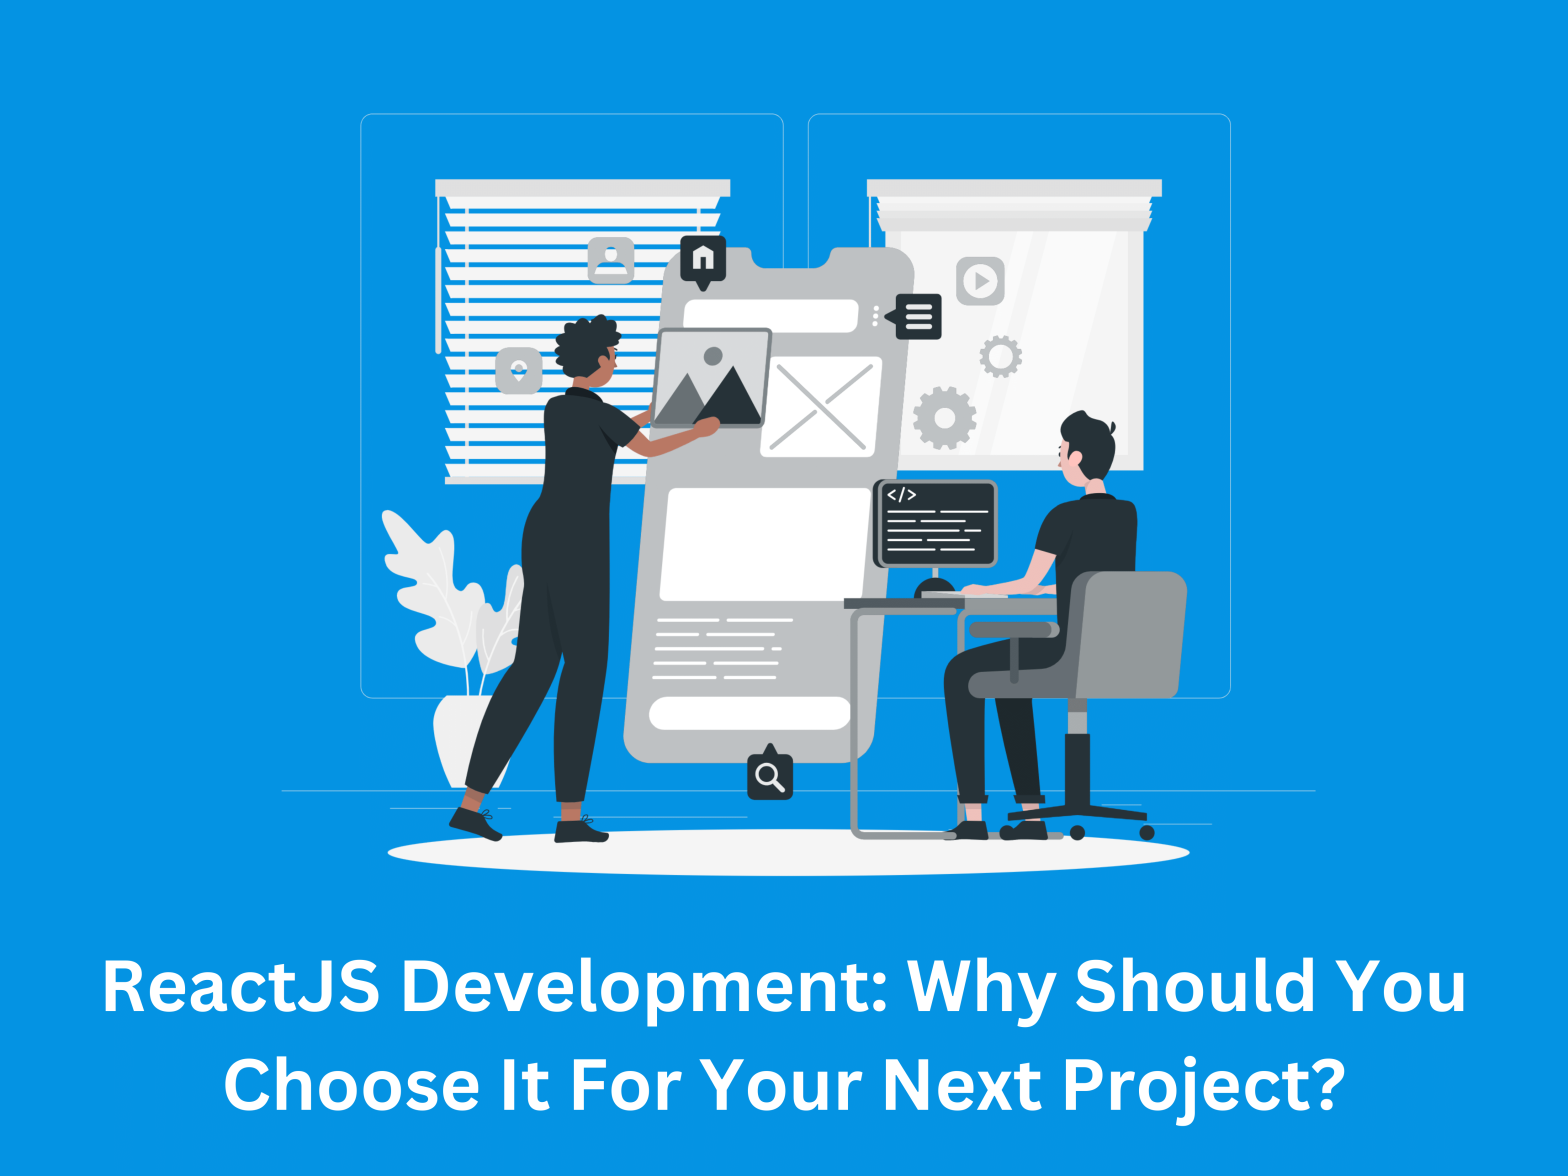 ReactJS Development: Why Should You Choose It For Your Next Project?